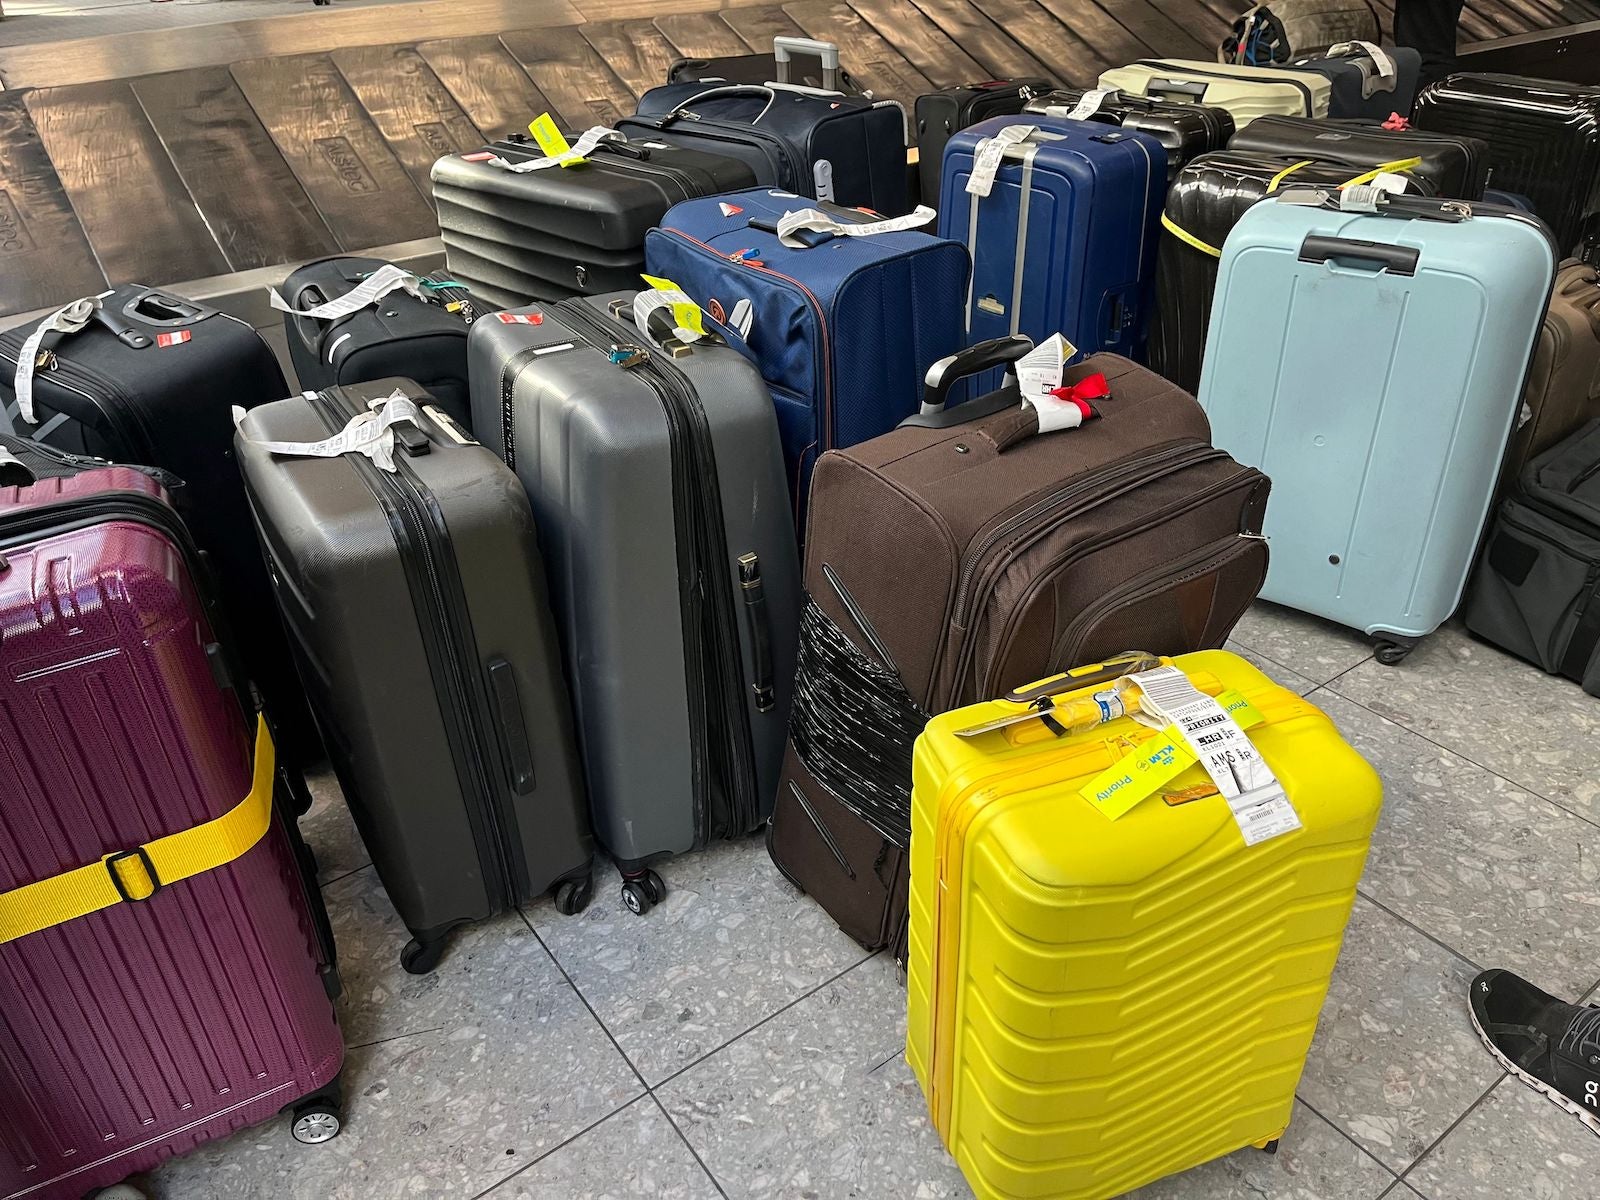 Suitcases uncollected at Heathrow's Terminal